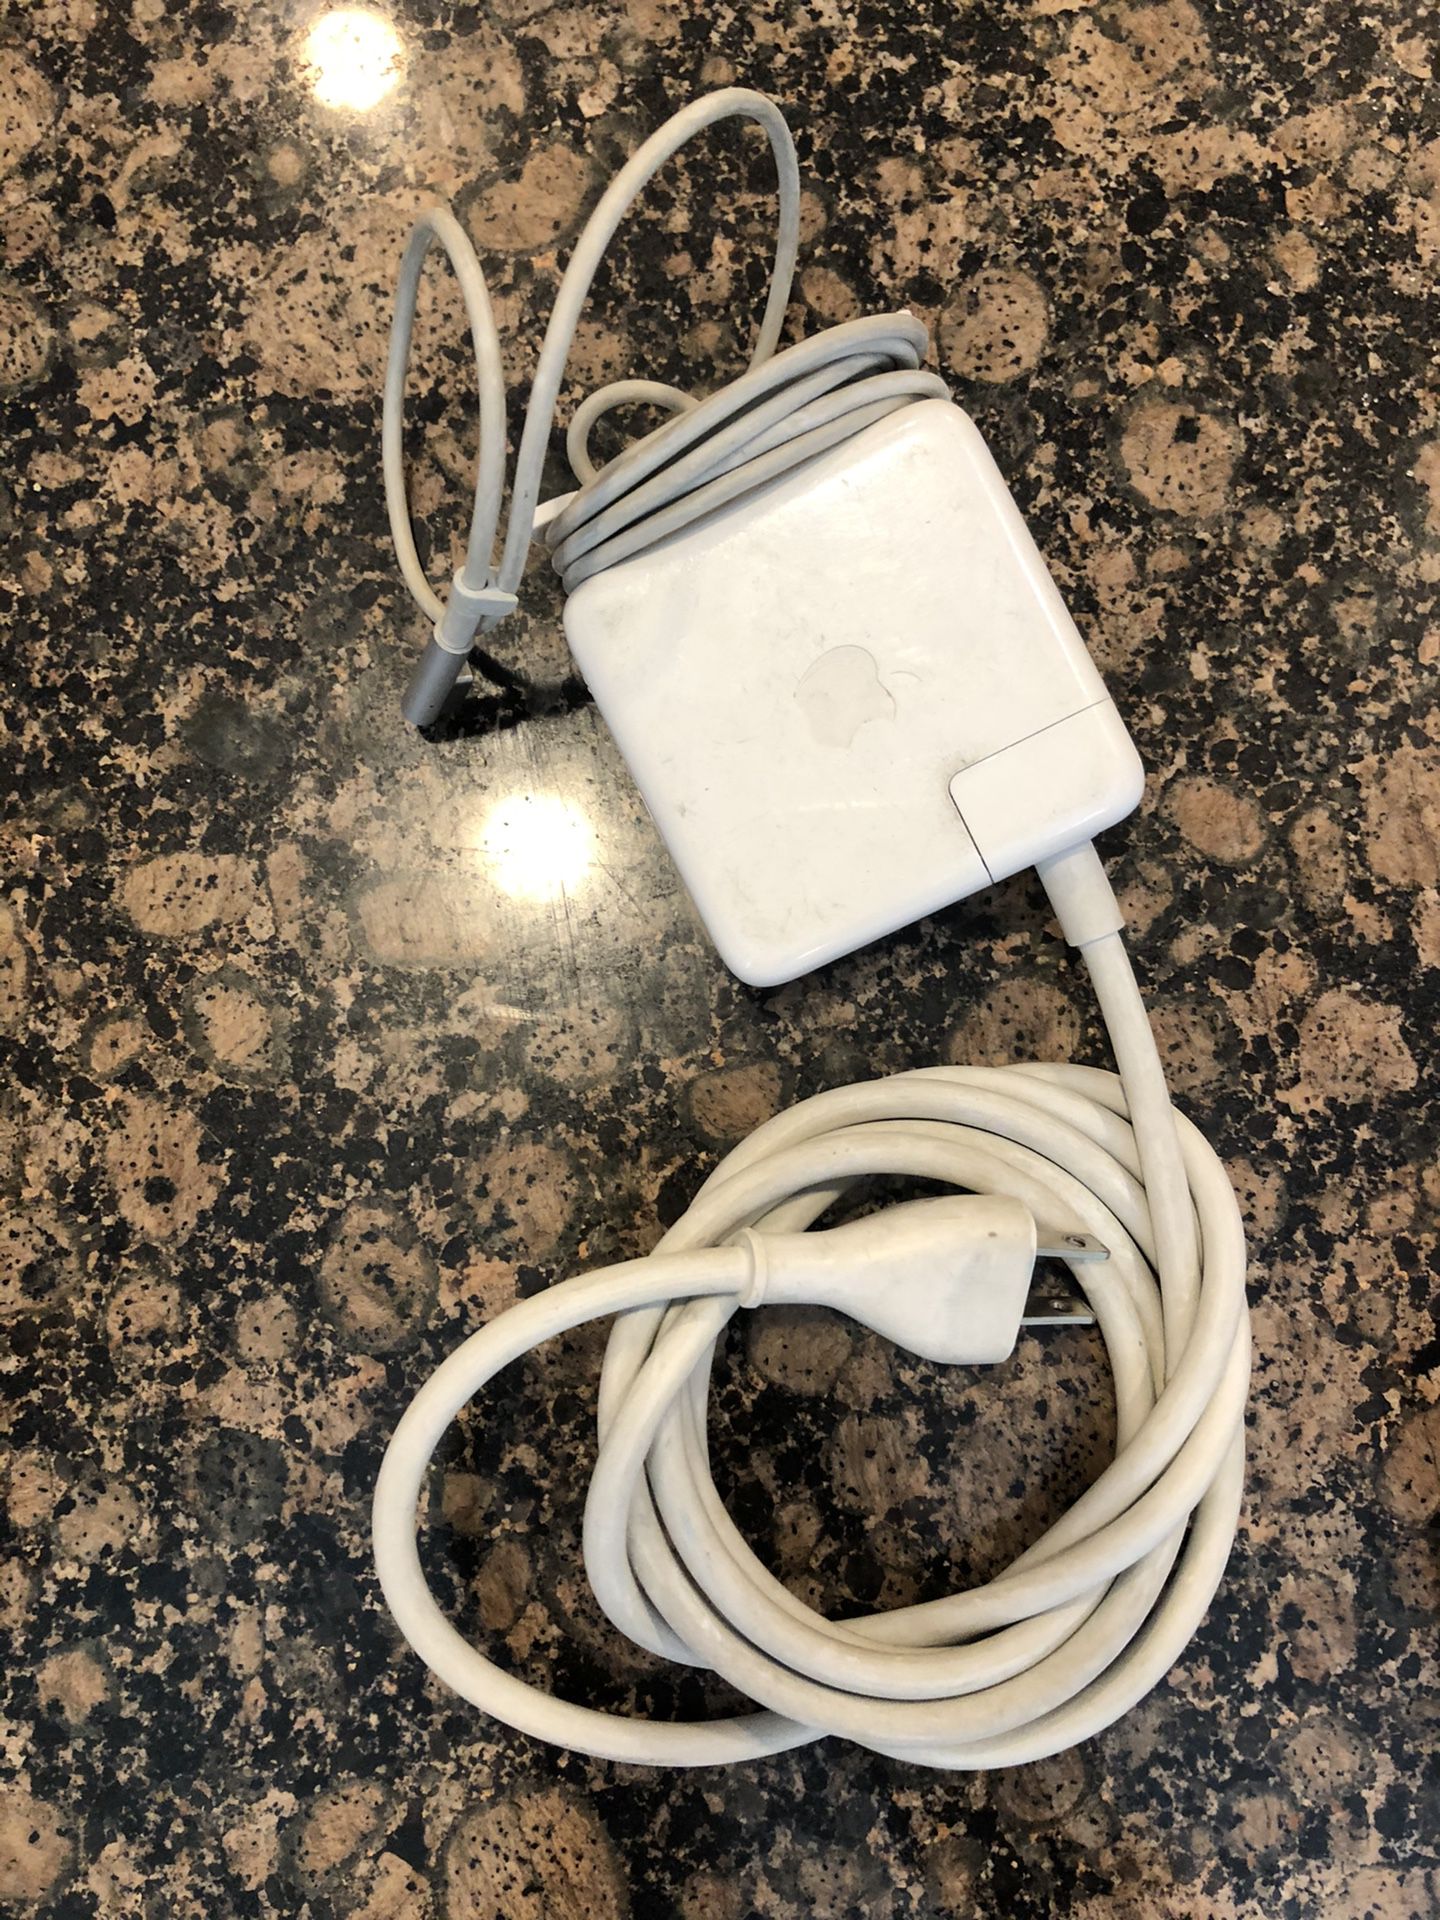 MacBook Pro charger